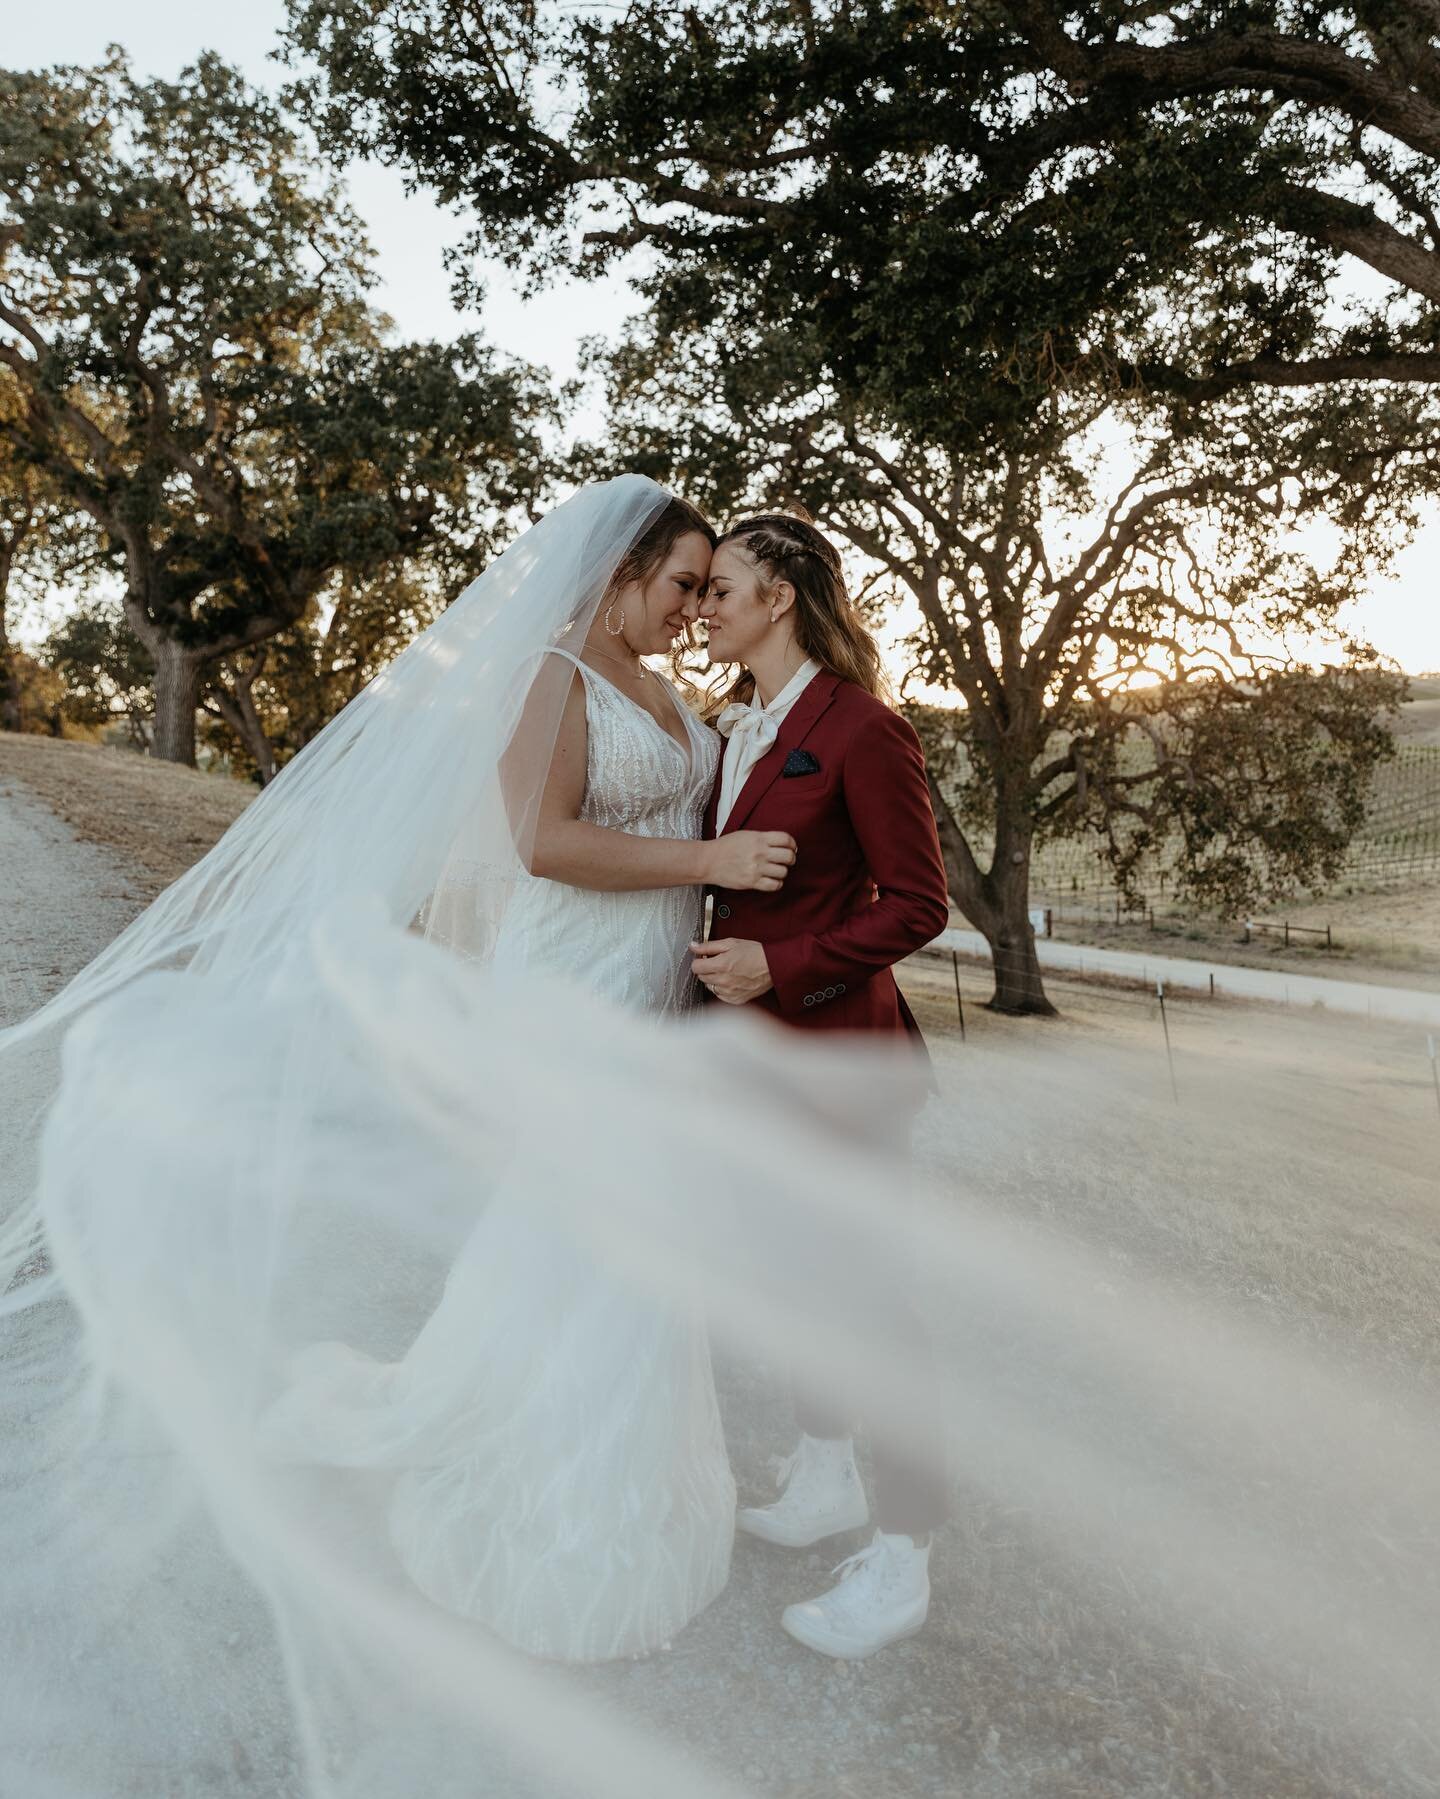 When the friendship turns into that forever kind of love ✨
.
.
.

Venue: @willowandoakestate 
Planning: @mady.bell.events 
Photographer: @the.randolphs 
Hospitality: @criuhospitality 
Bar service: @mixedevents805 
Rentals: @allaboutevents 
Specialty 